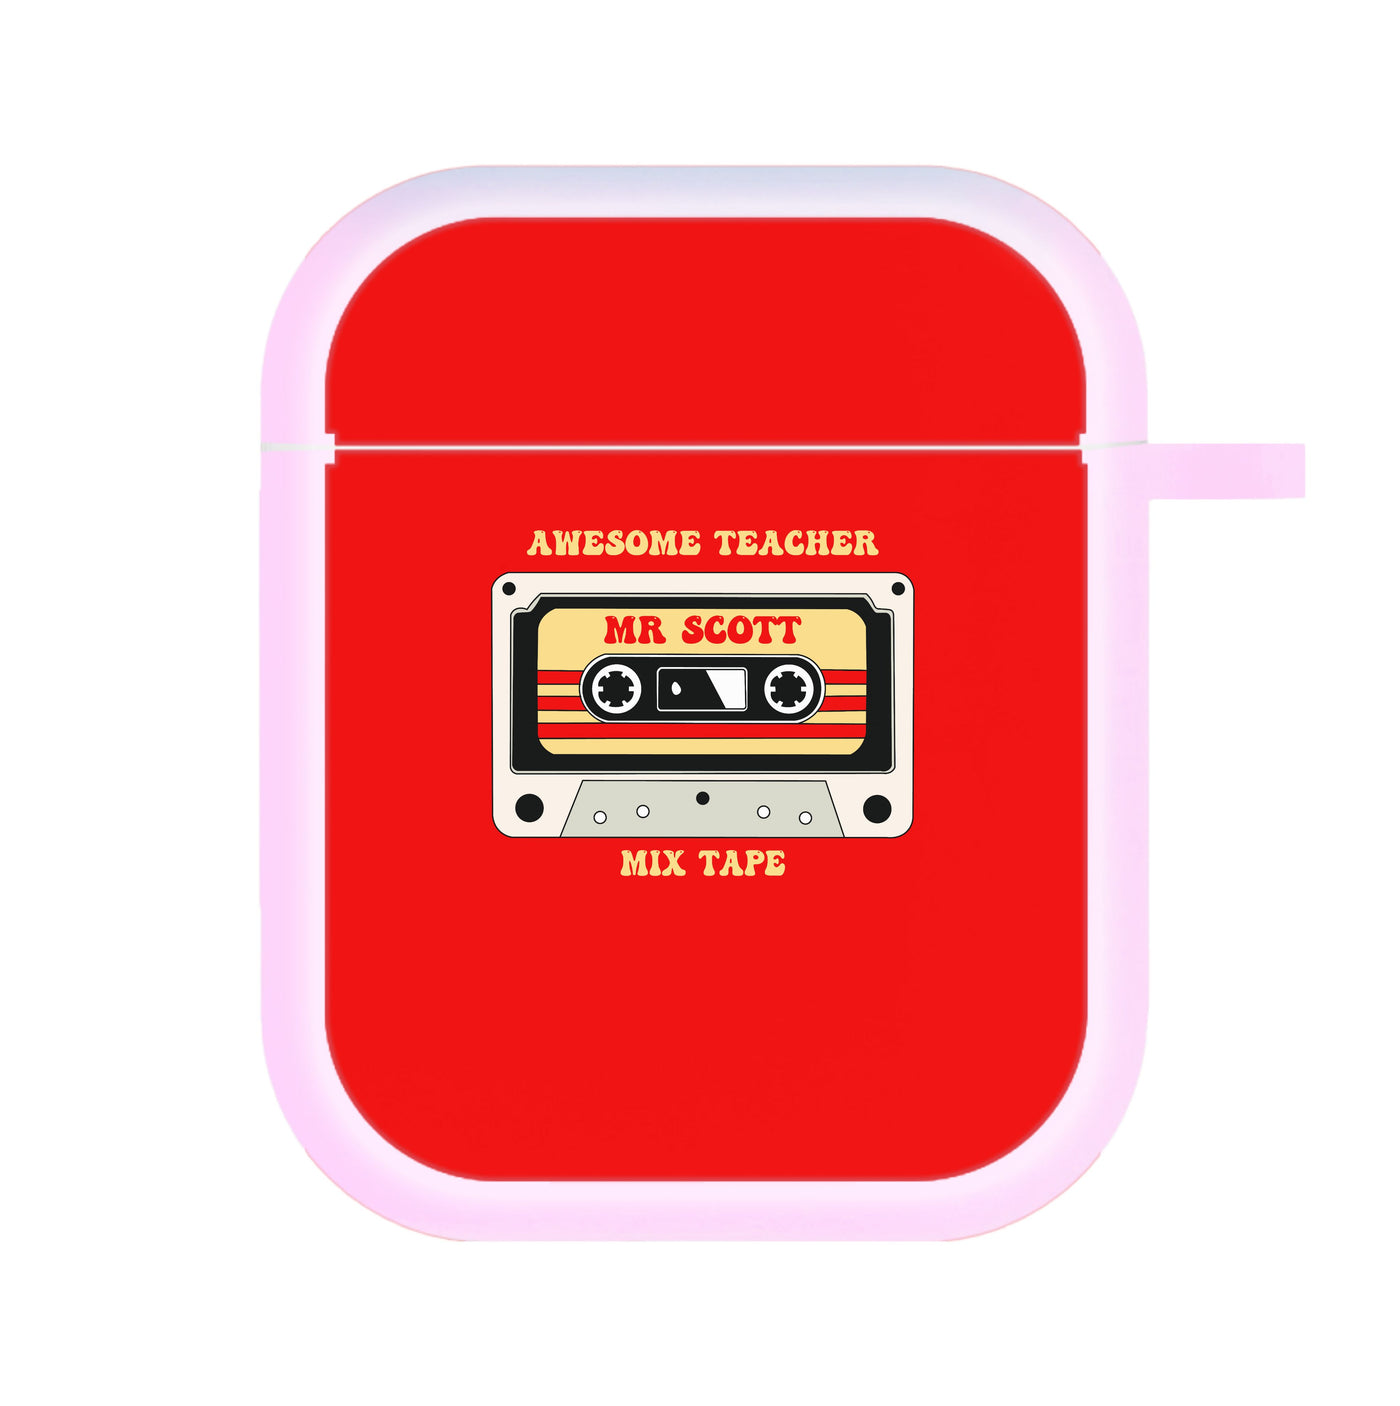 Awesome Teacher Mix Tape - Personalised Teachers Gift AirPods Case